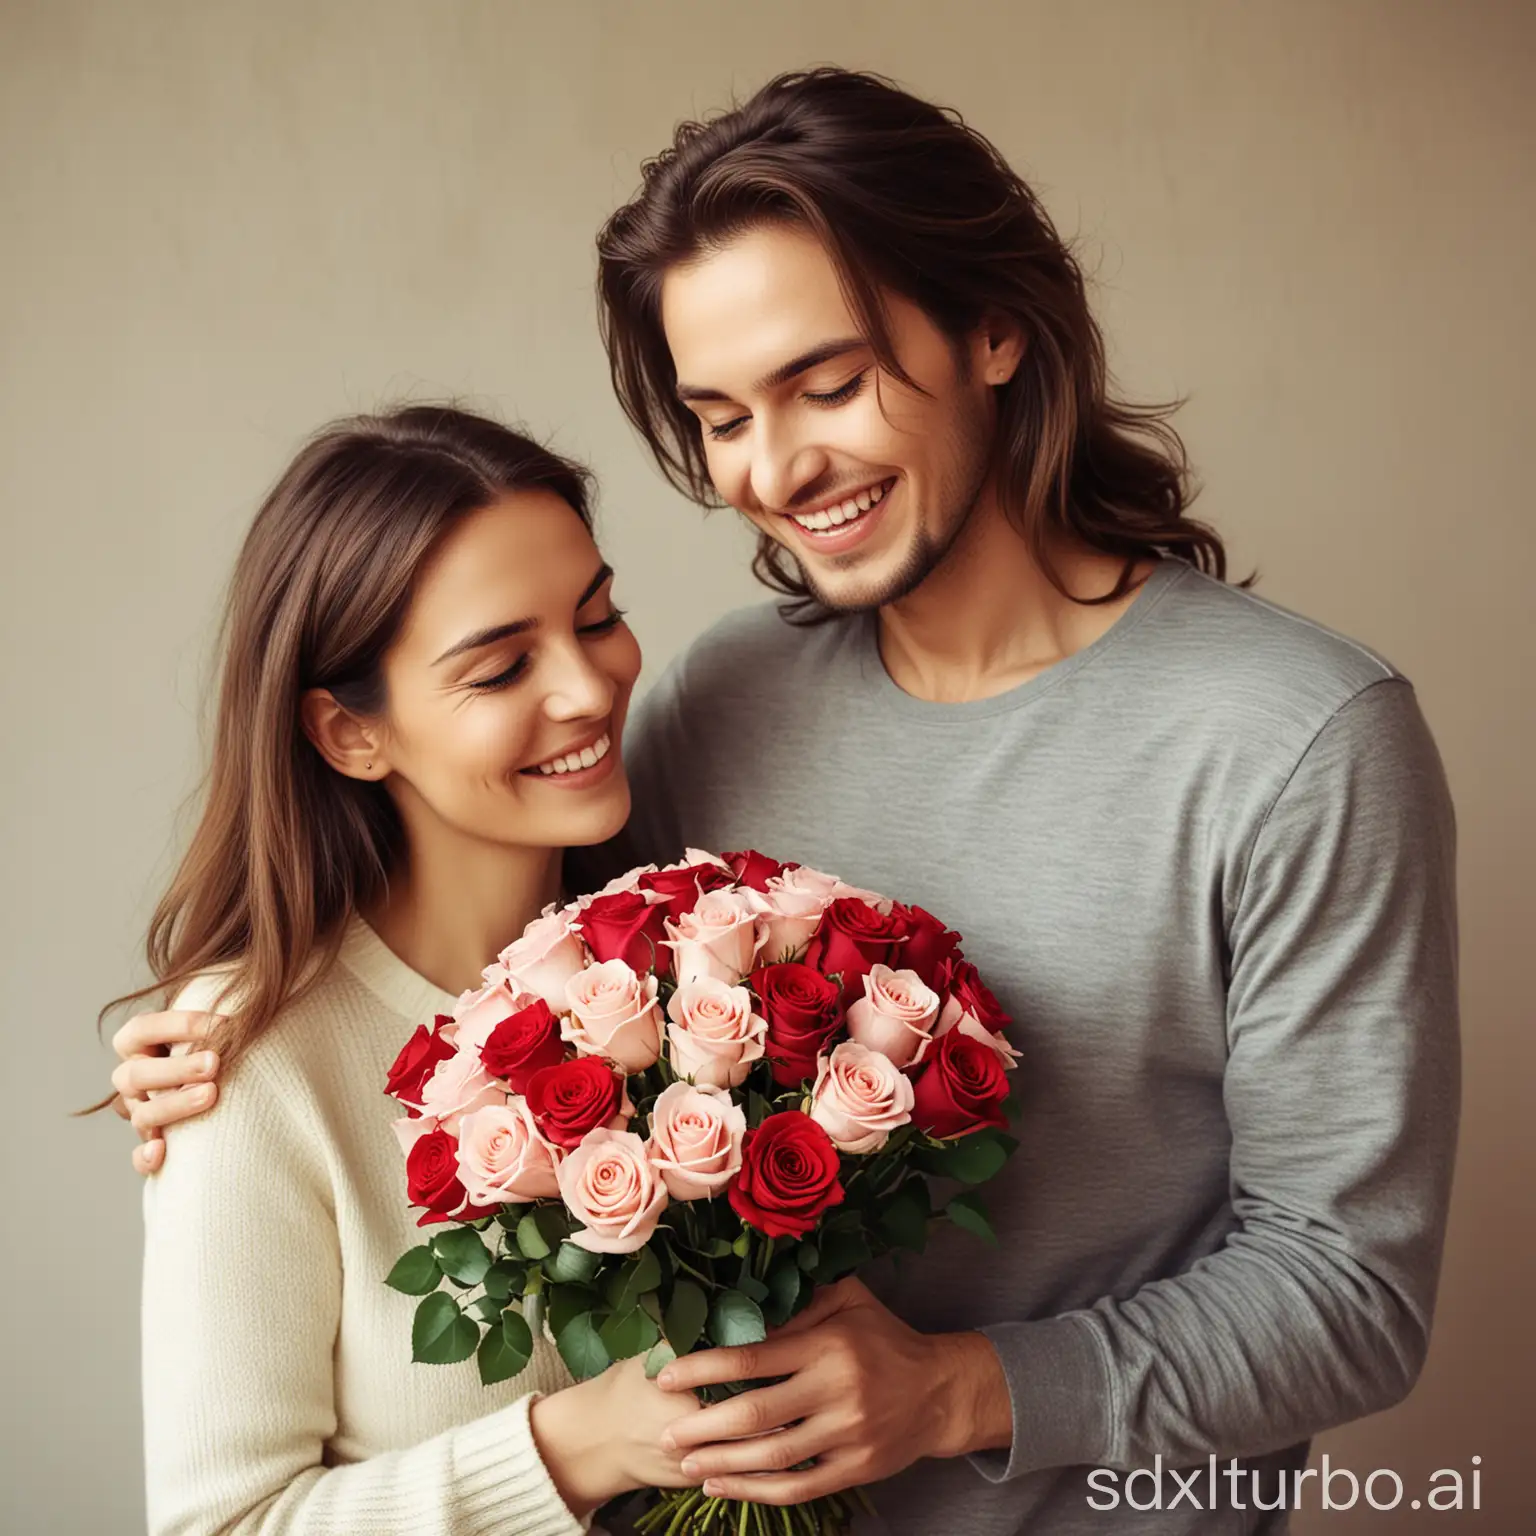 Joyful-Woman-Receives-Bouquet-of-Roses-from-Loving-Partner